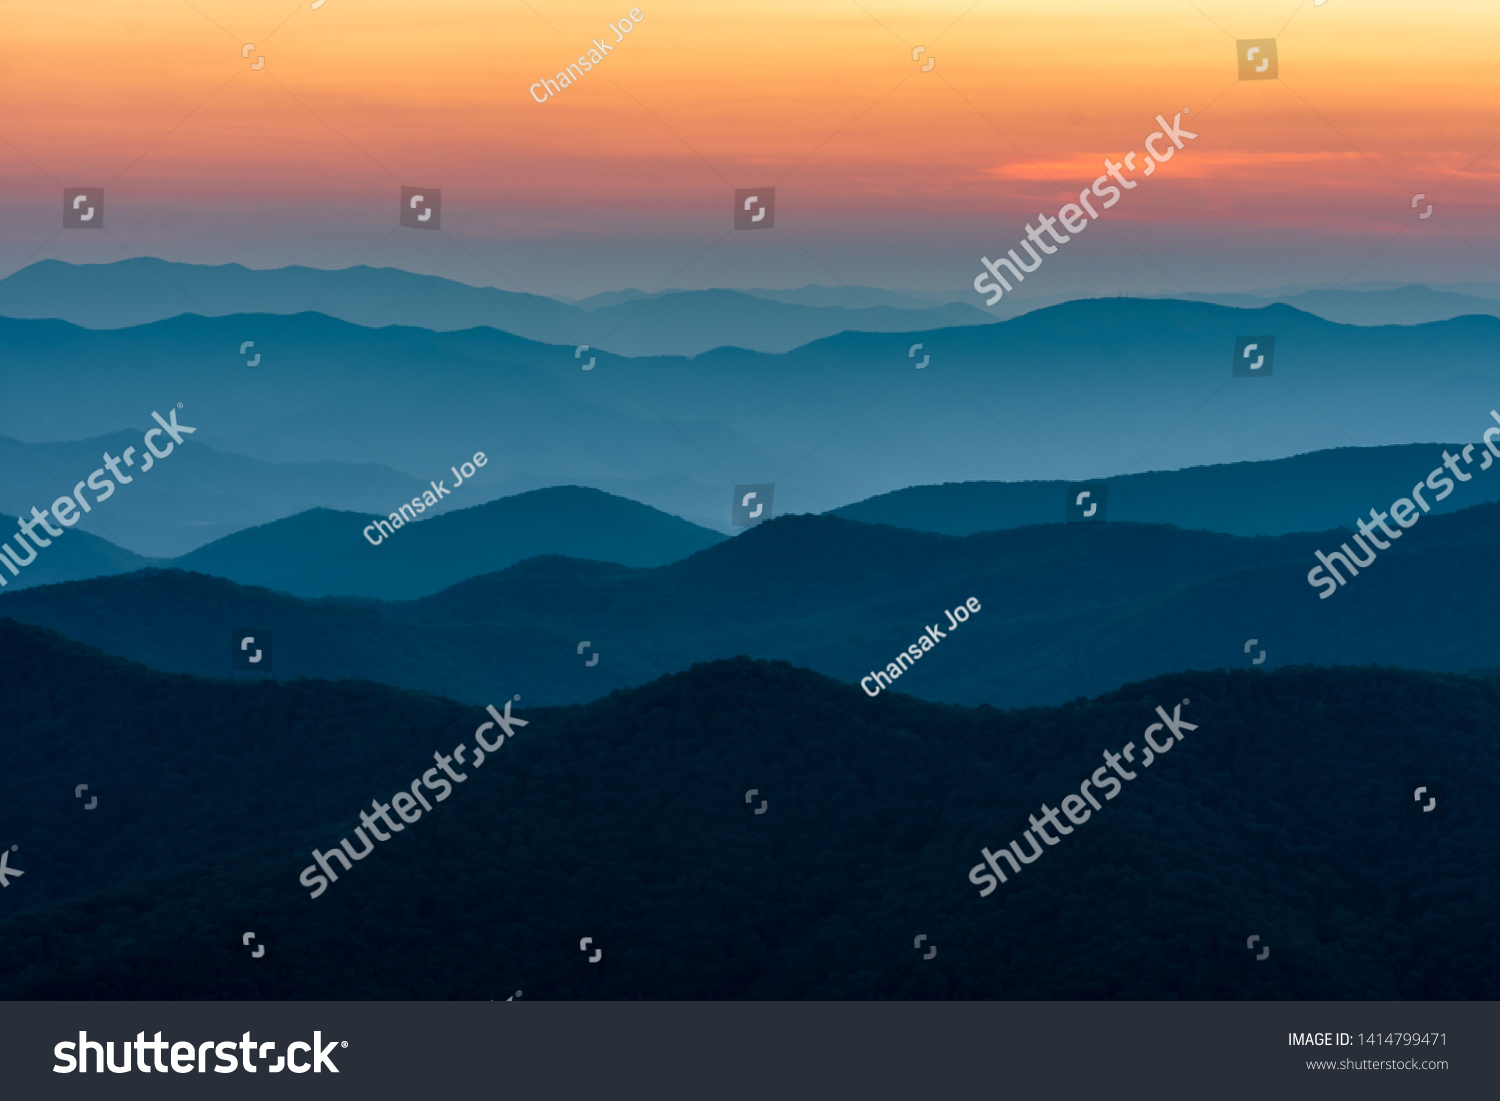 Scenic drive from Cowee Mountain Overlook on Blue Ridge Parkway at sunset time. #1414799471